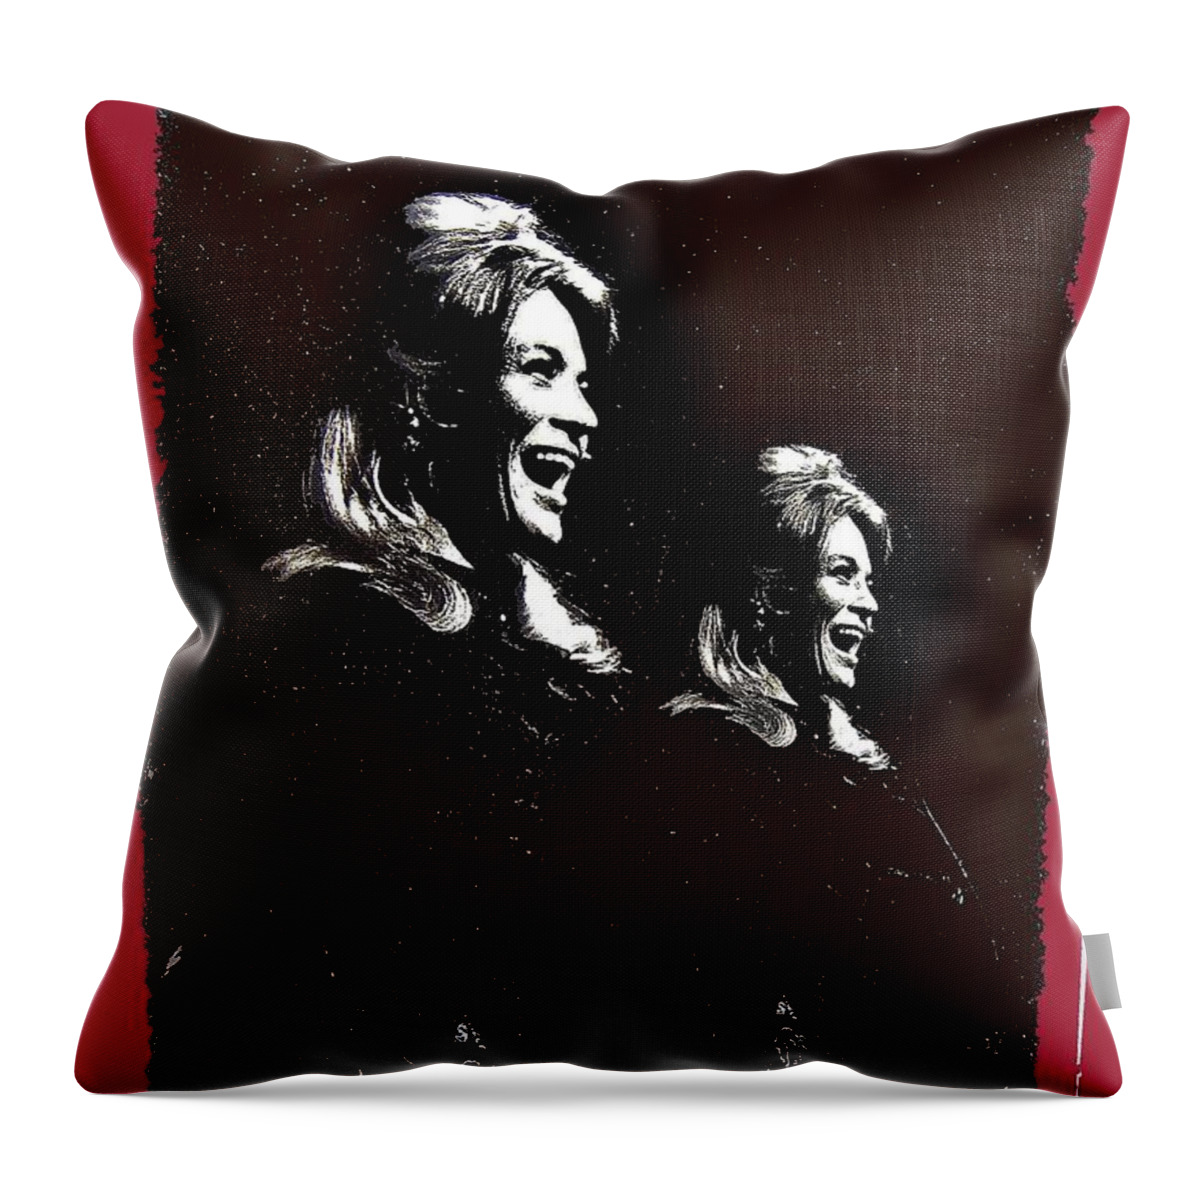 Angie Dickinson Young Billy Young 6 Old Tucson Arizona 1968 Throw Pillow featuring the photograph Angie Dickinson Young Billy Young 6 Old Tucson Arizona 1968-2013 #3 by David Lee Guss